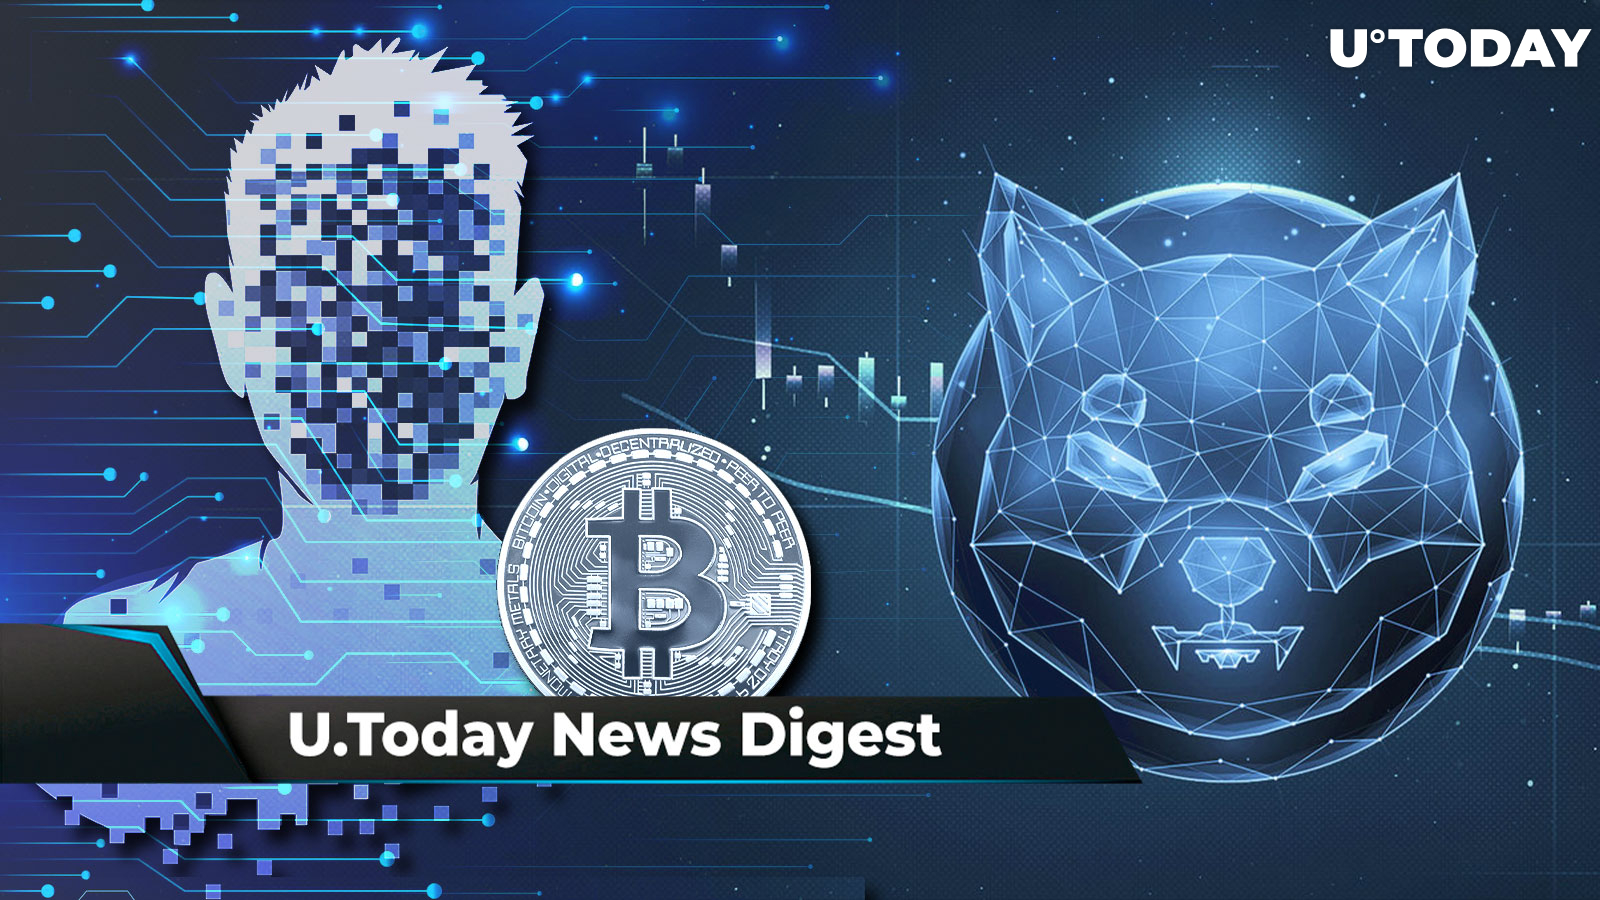 Satoshi’s Identity Might Have Been Revealed, Shytoshi Kusama Shares Mysterious Message, Almost Half of SHIB Supply Gone: Crypto News Digest by U.Today